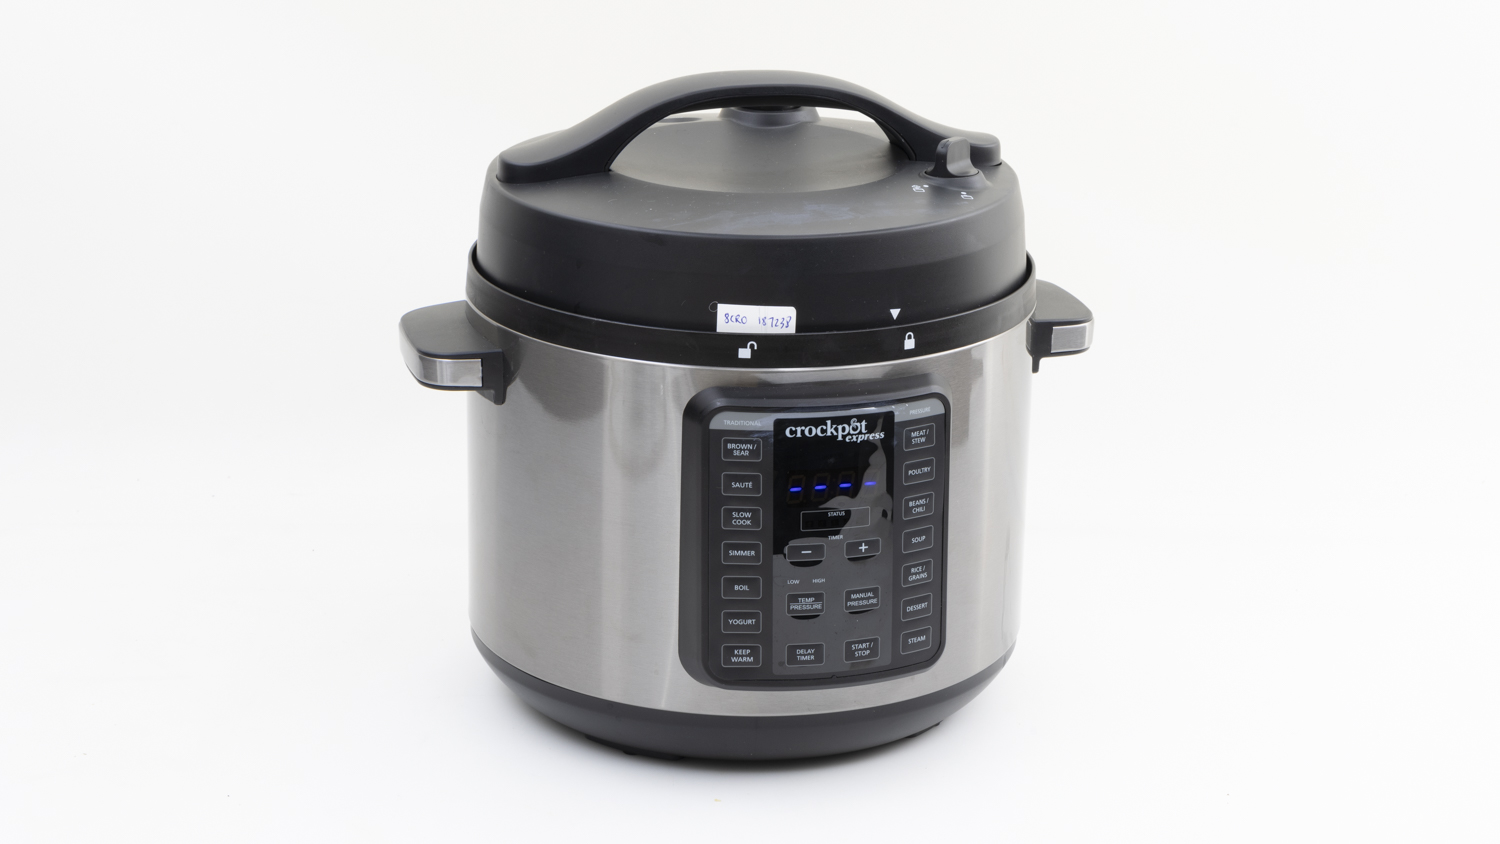 Crock-Pot Express Easy Release XL Pressure Multicooker CPE310 carousel image